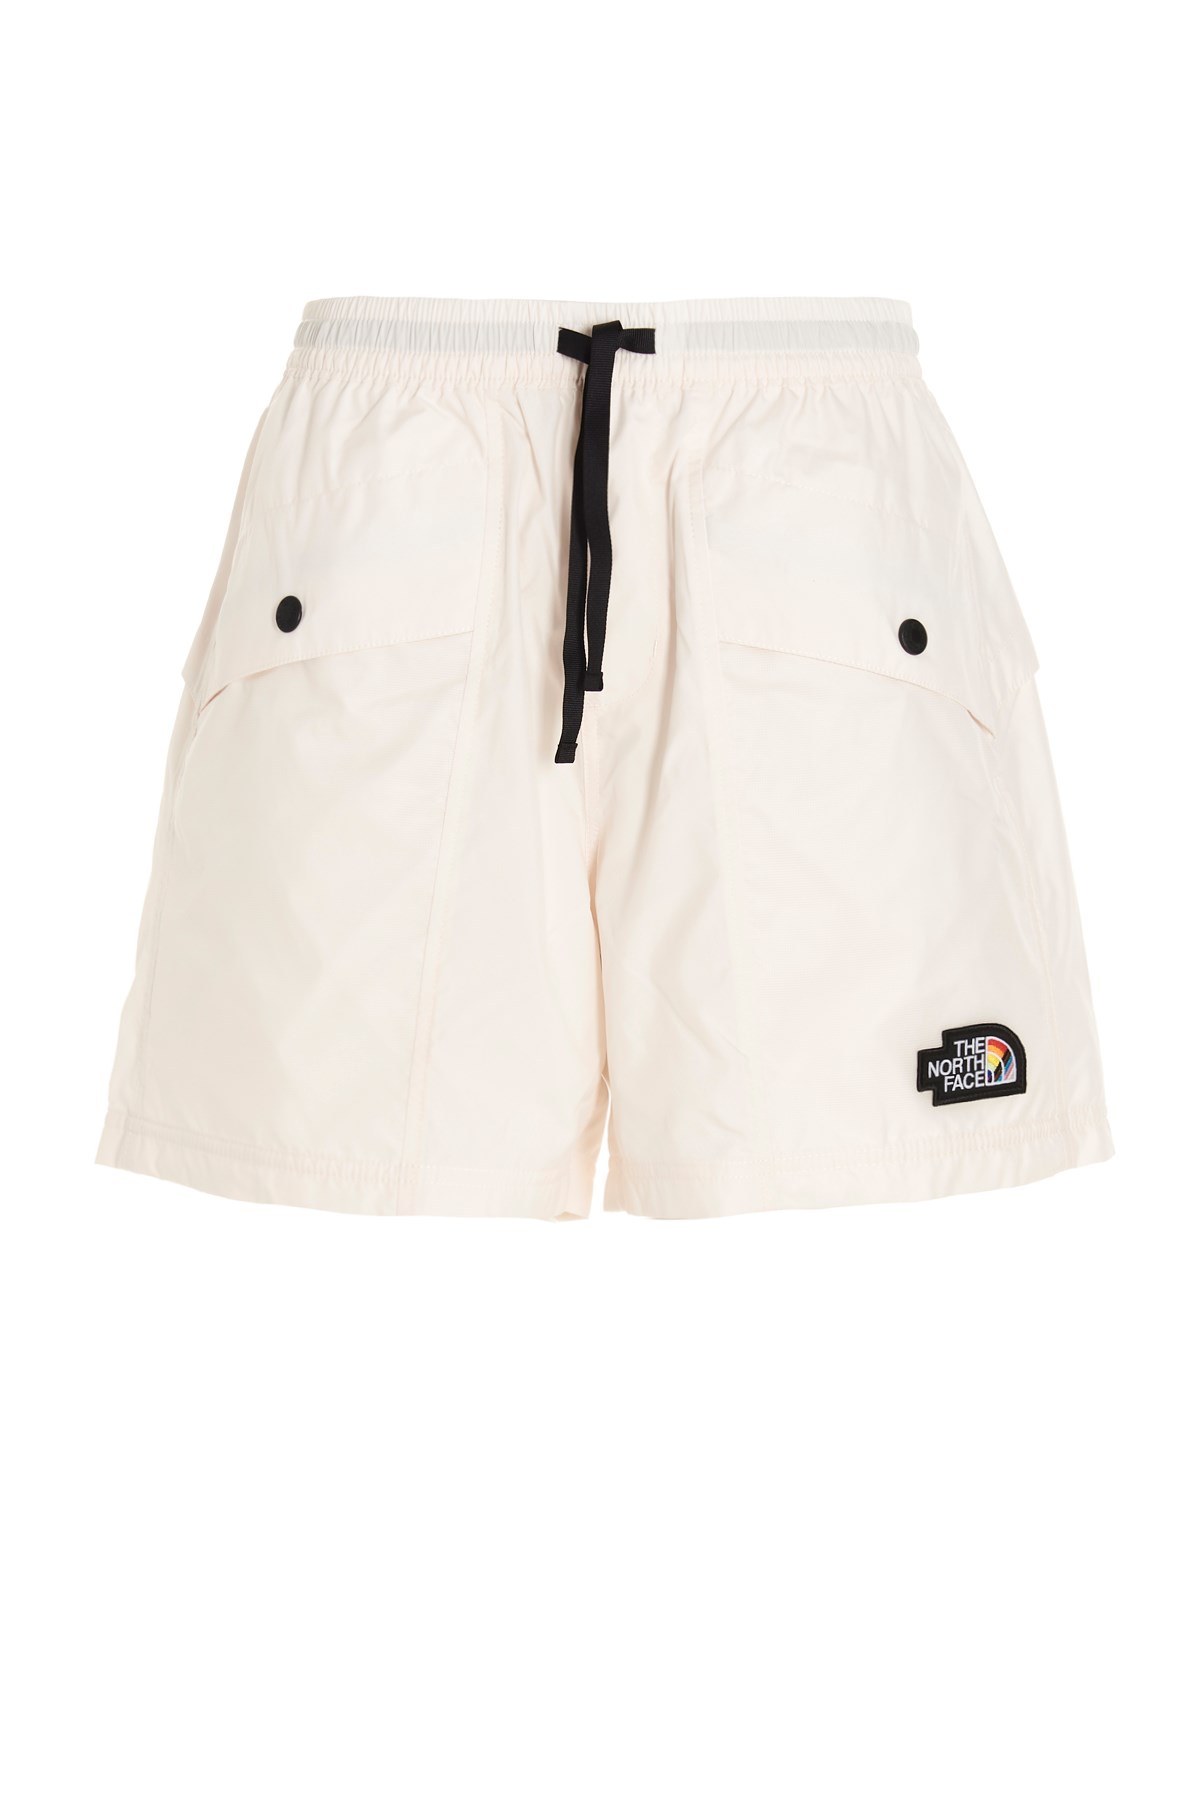 THE NORTH FACE Shorts 'Tnf Outline’